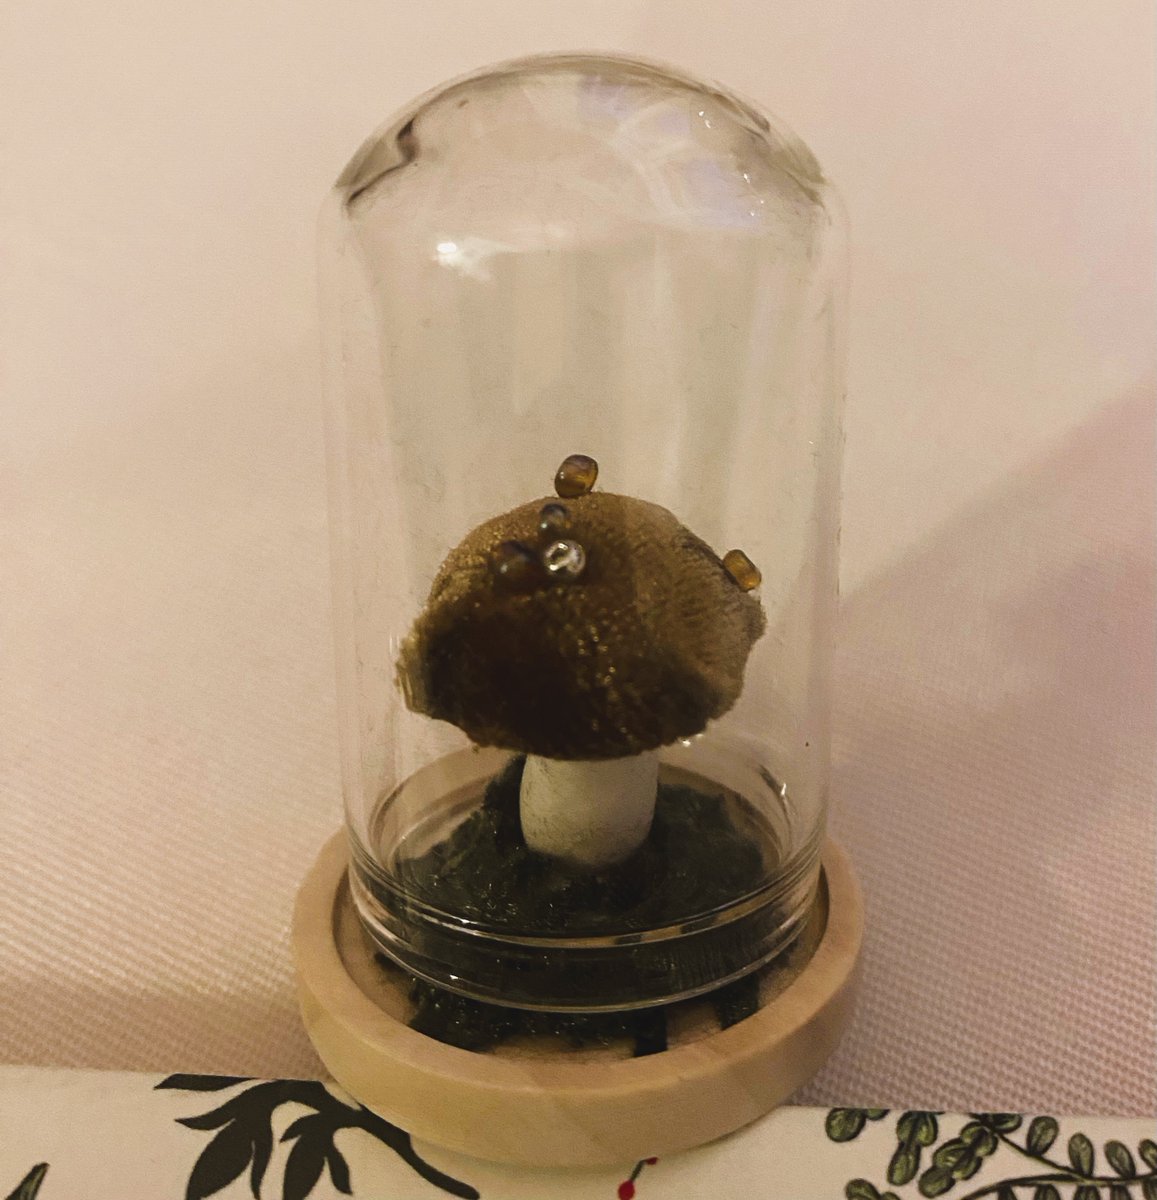 We had a great time at this month's stanza group meeting. Some wonderful poems and we used a model toadstool under a dome as our prompt - as you do! #poetry #lovepoetry #wisbech